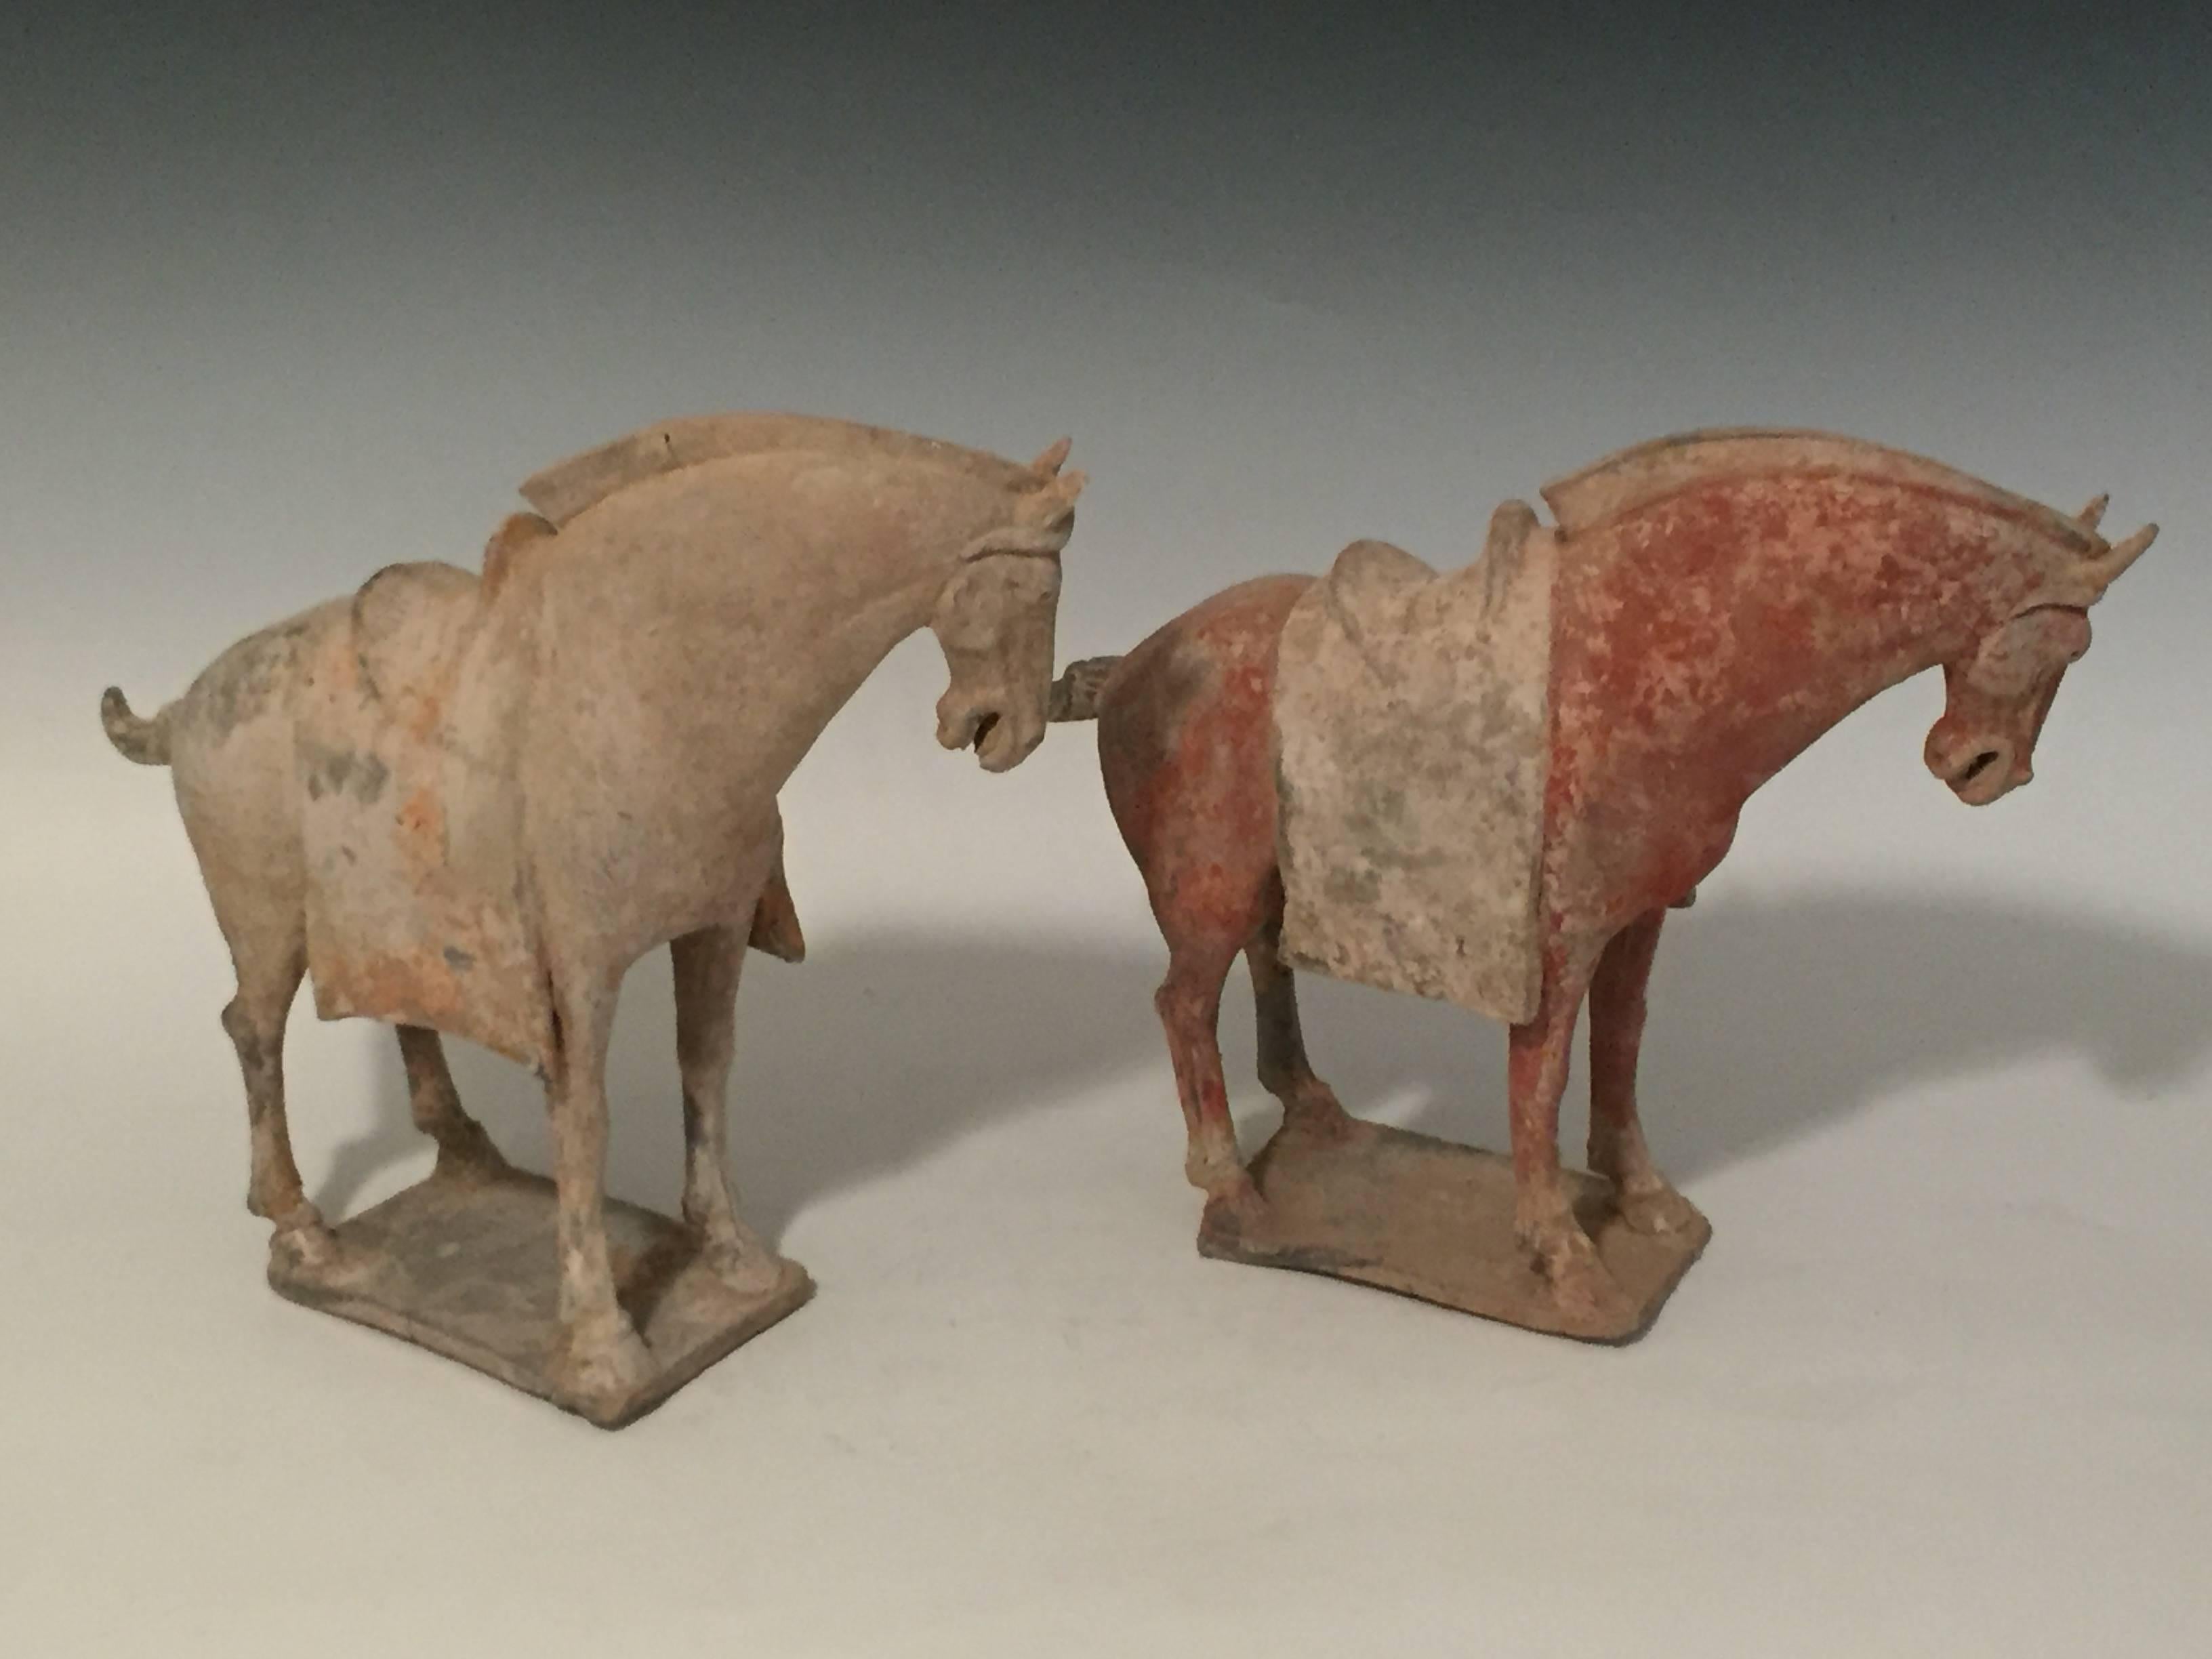 A pair of Tang dynasty (618-907 A.D.) Horses. 
Standing four square on bases.
Both horses still have some original pigment. One with a off-white pigment, and the other has a red pigment. Each with head slightly turned to the left.
14